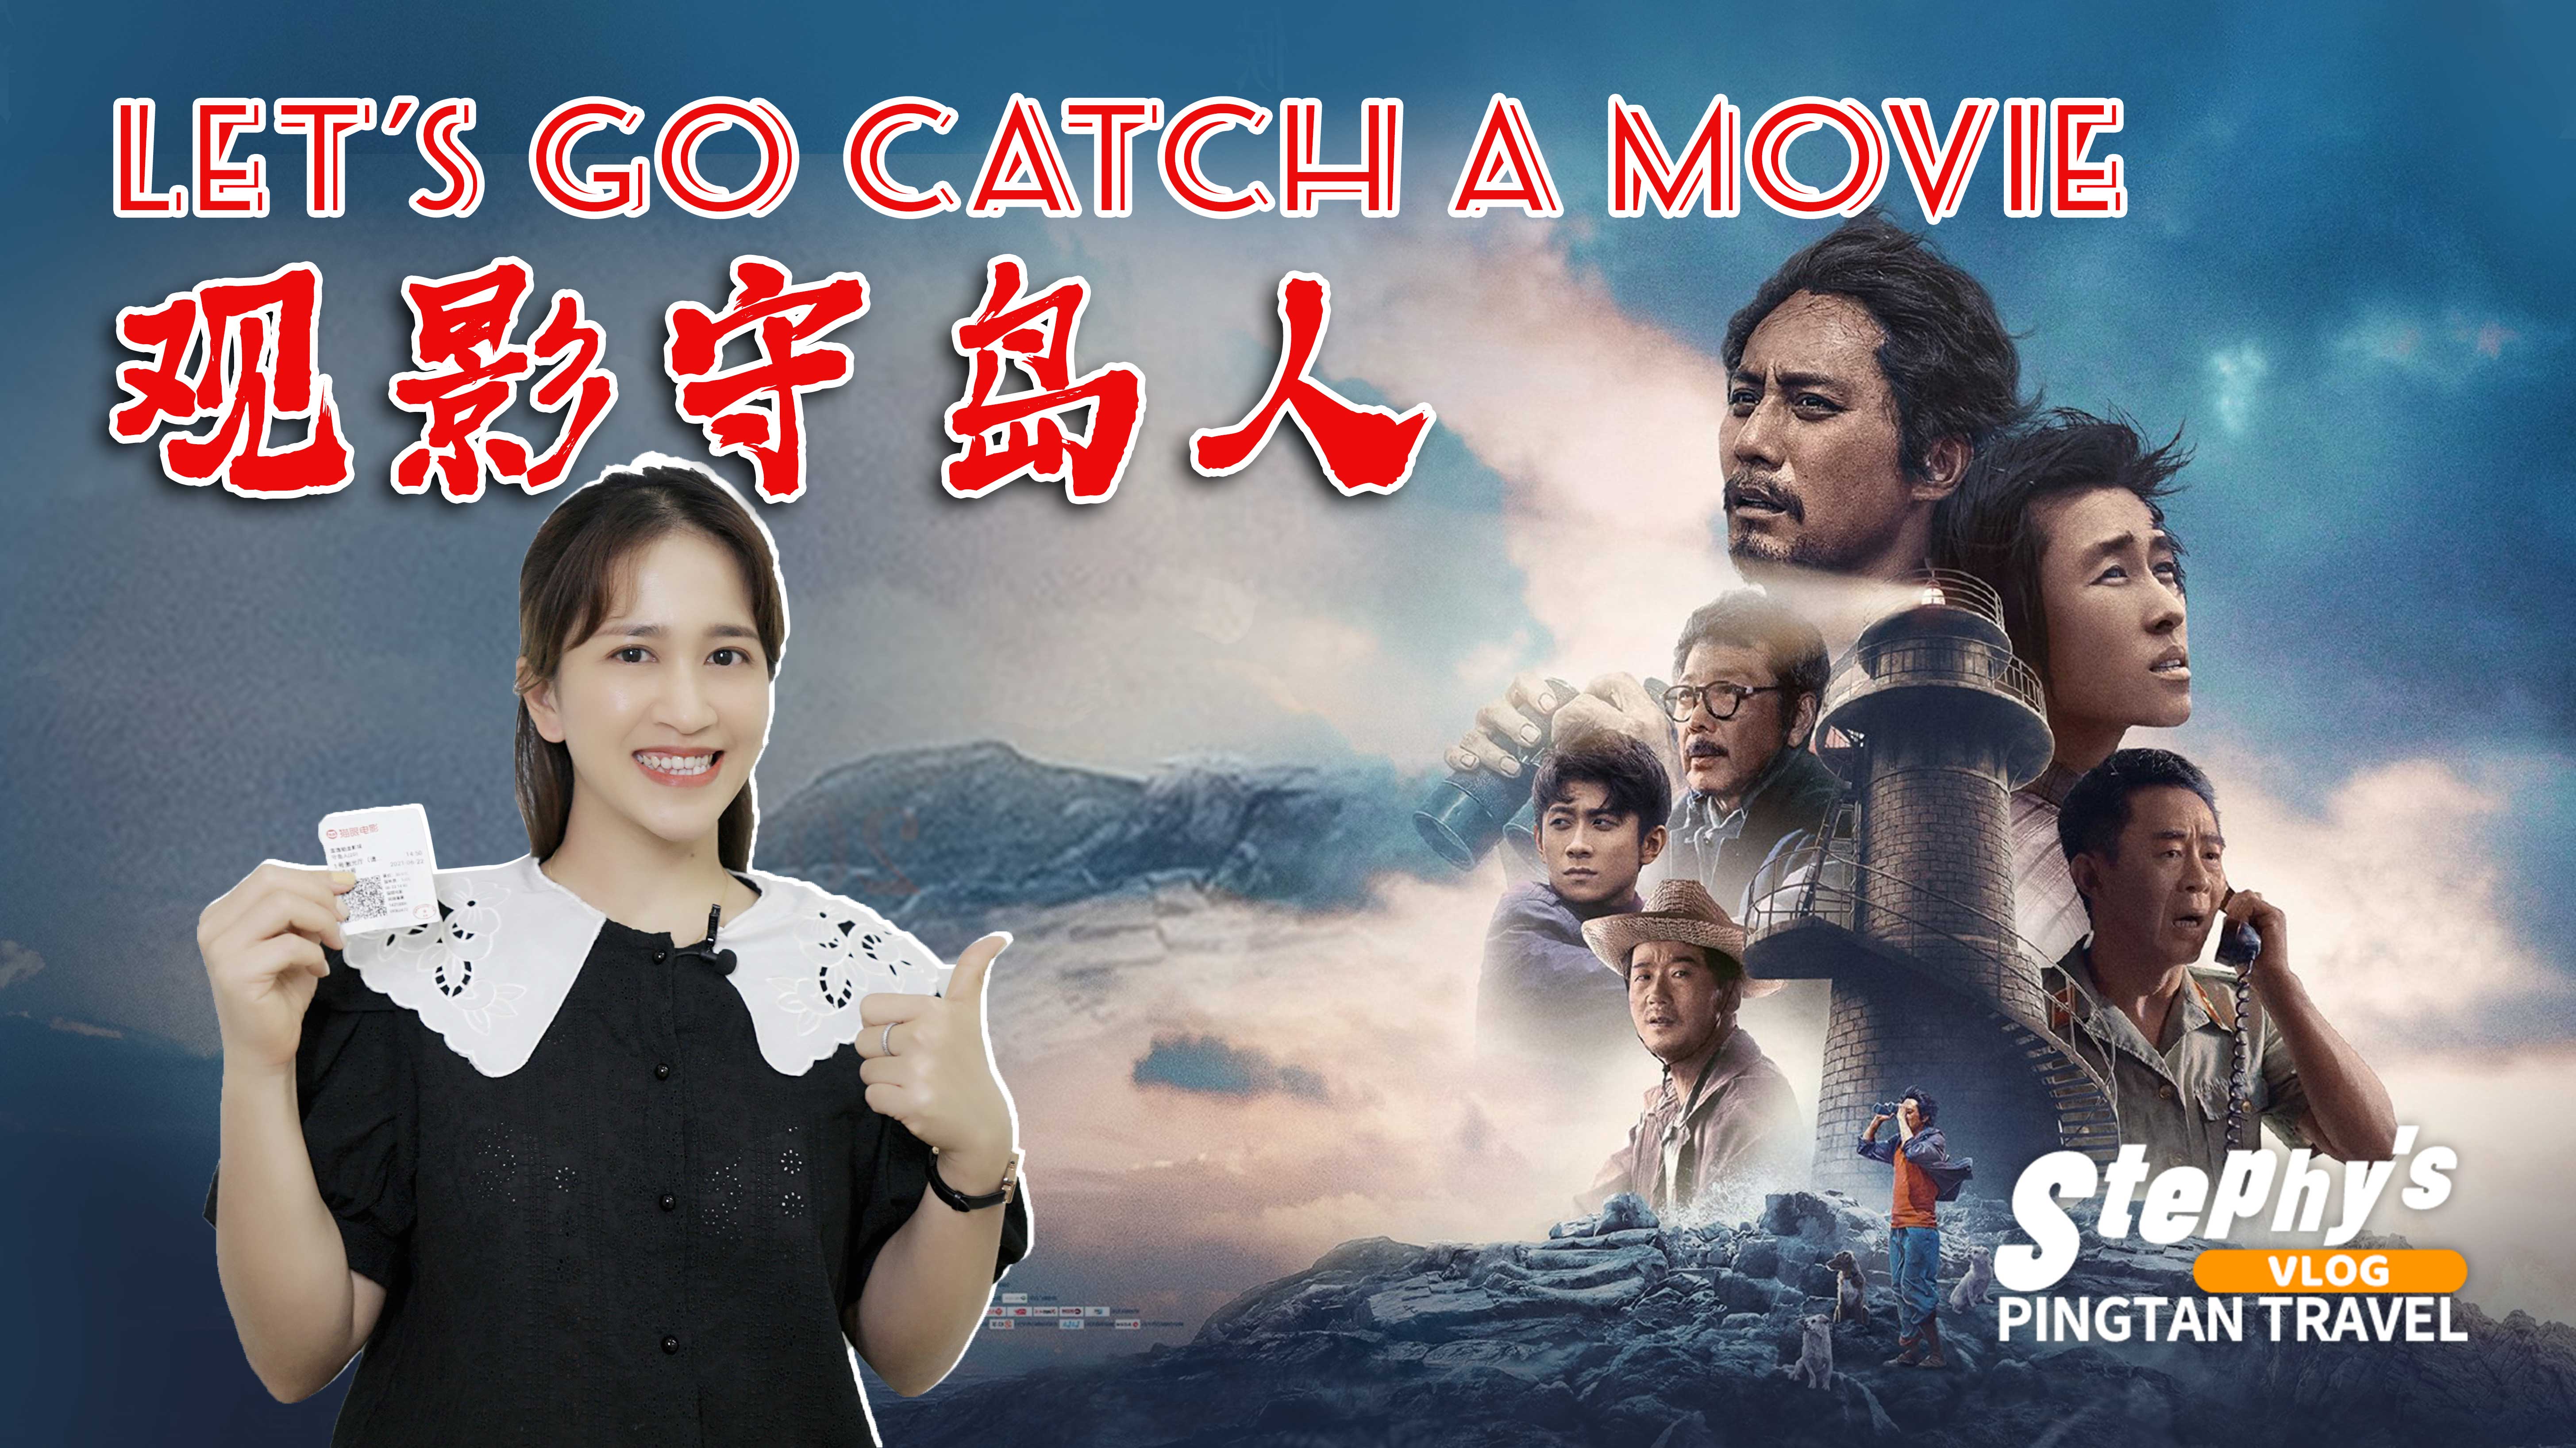 Stephy's Pingtan Travel｜ Let's go catch a movie: Island Keeper